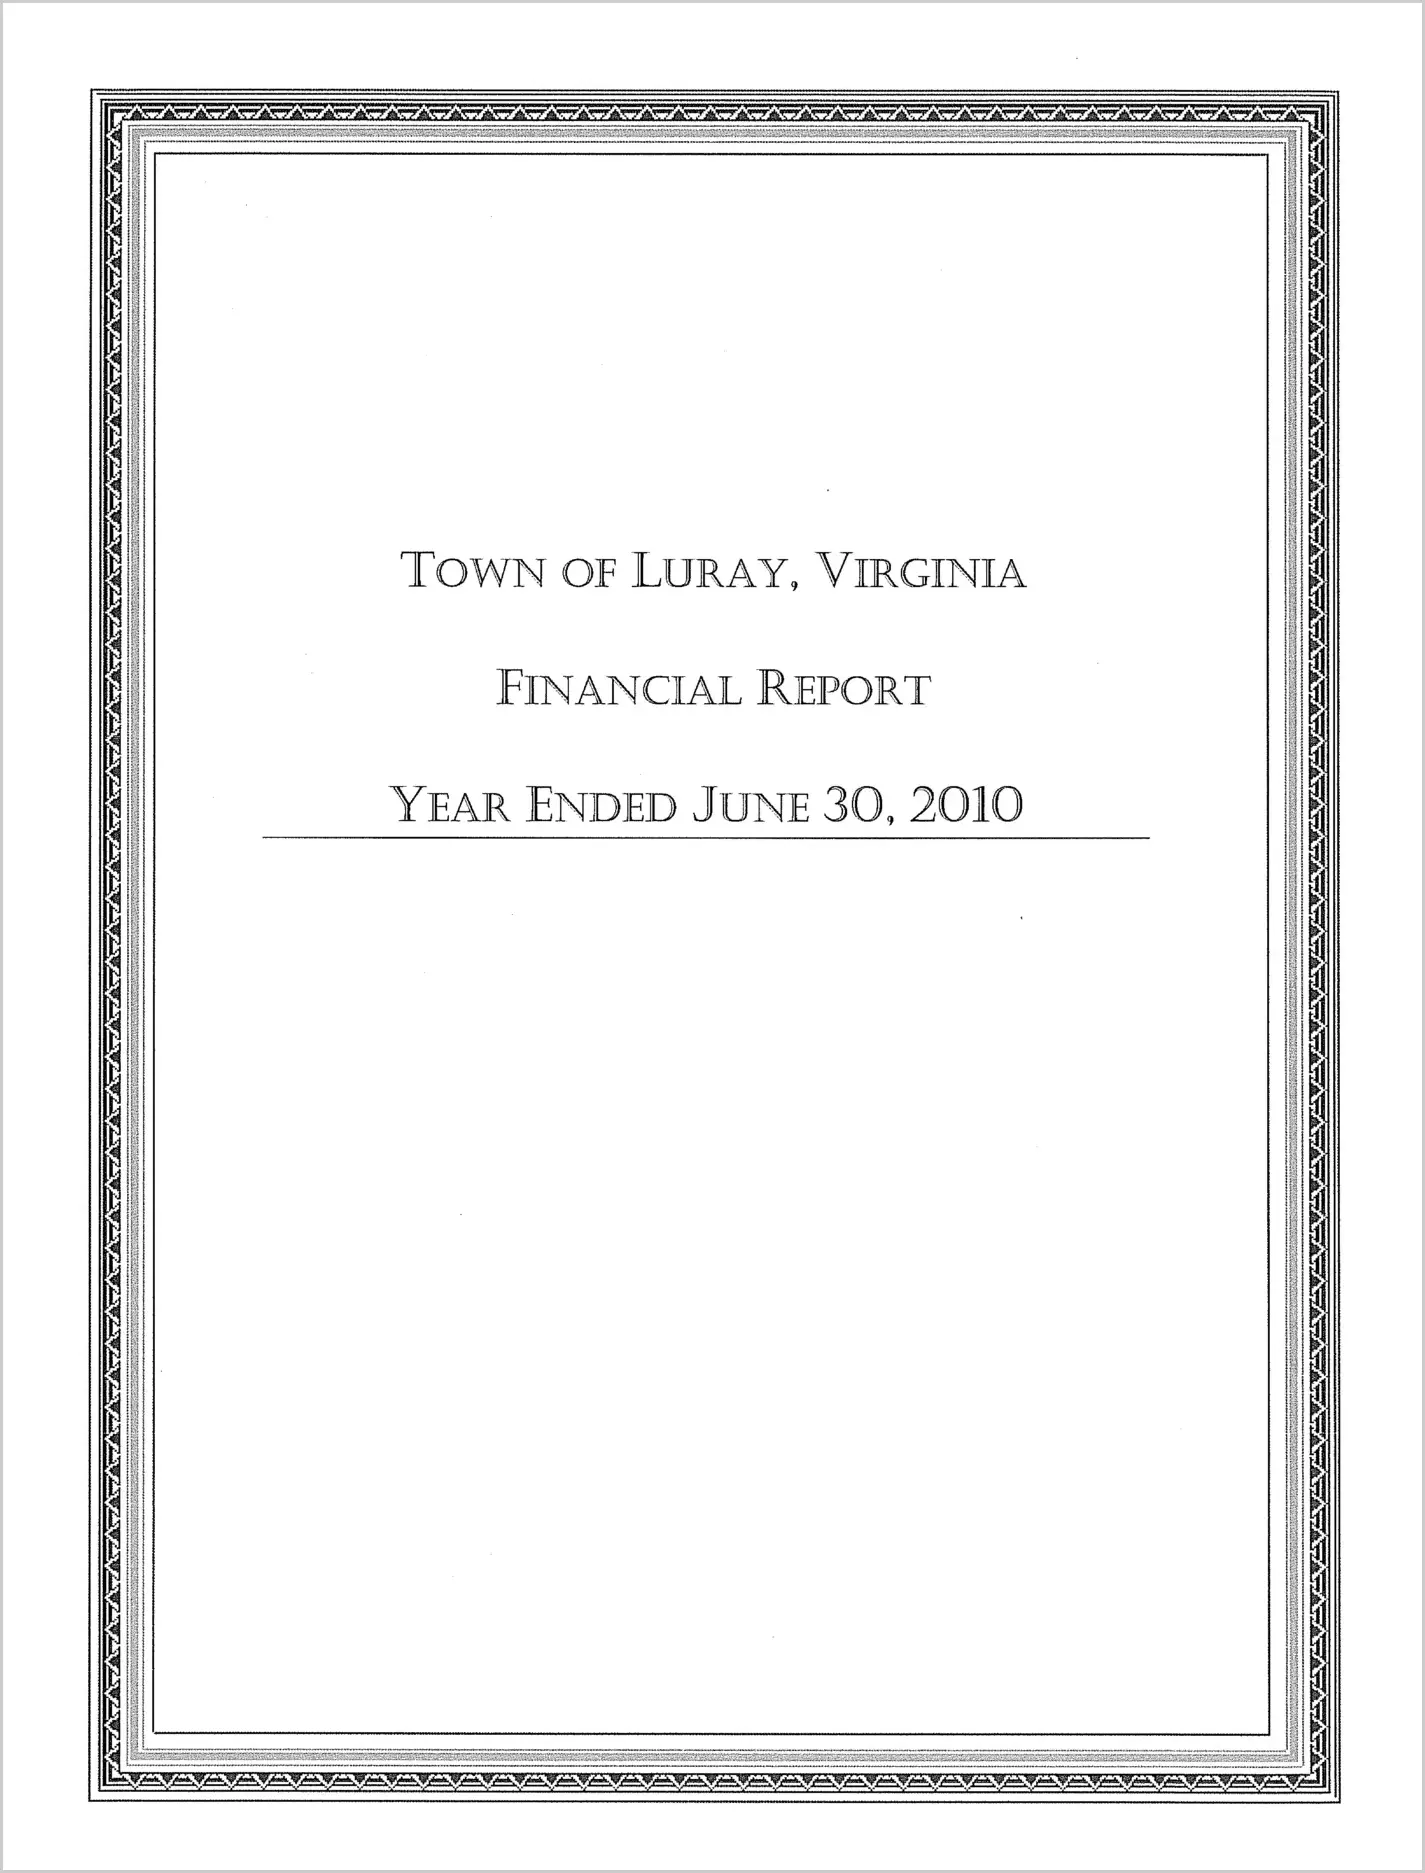 2010 Annual Financial Report for Town of Luray